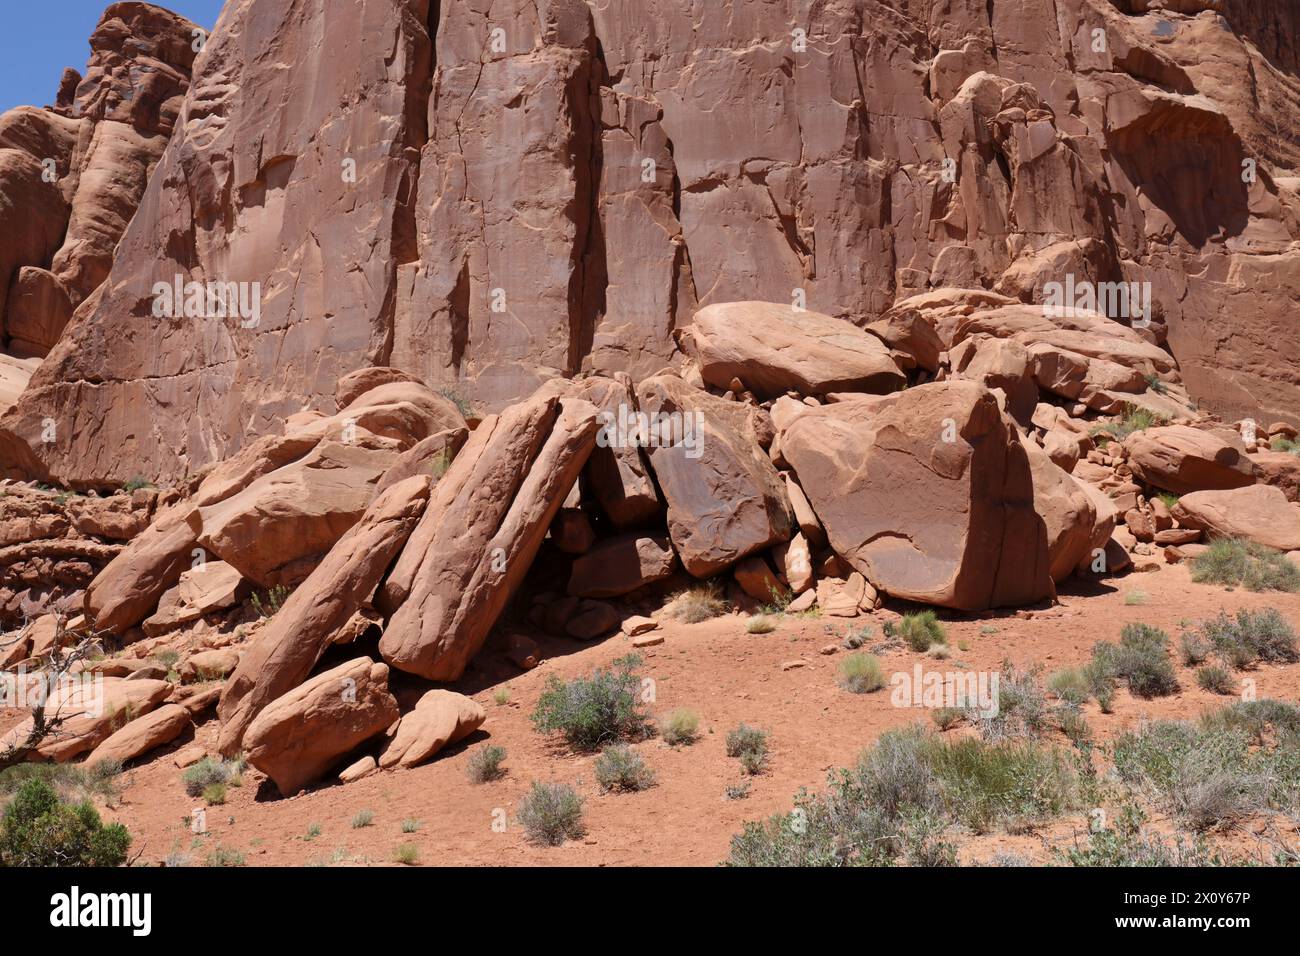 A pile of large boulders made of Entrada Sandstone in front of a wall of rock in Arches National park, Moab, Utah, USA Stock Photo